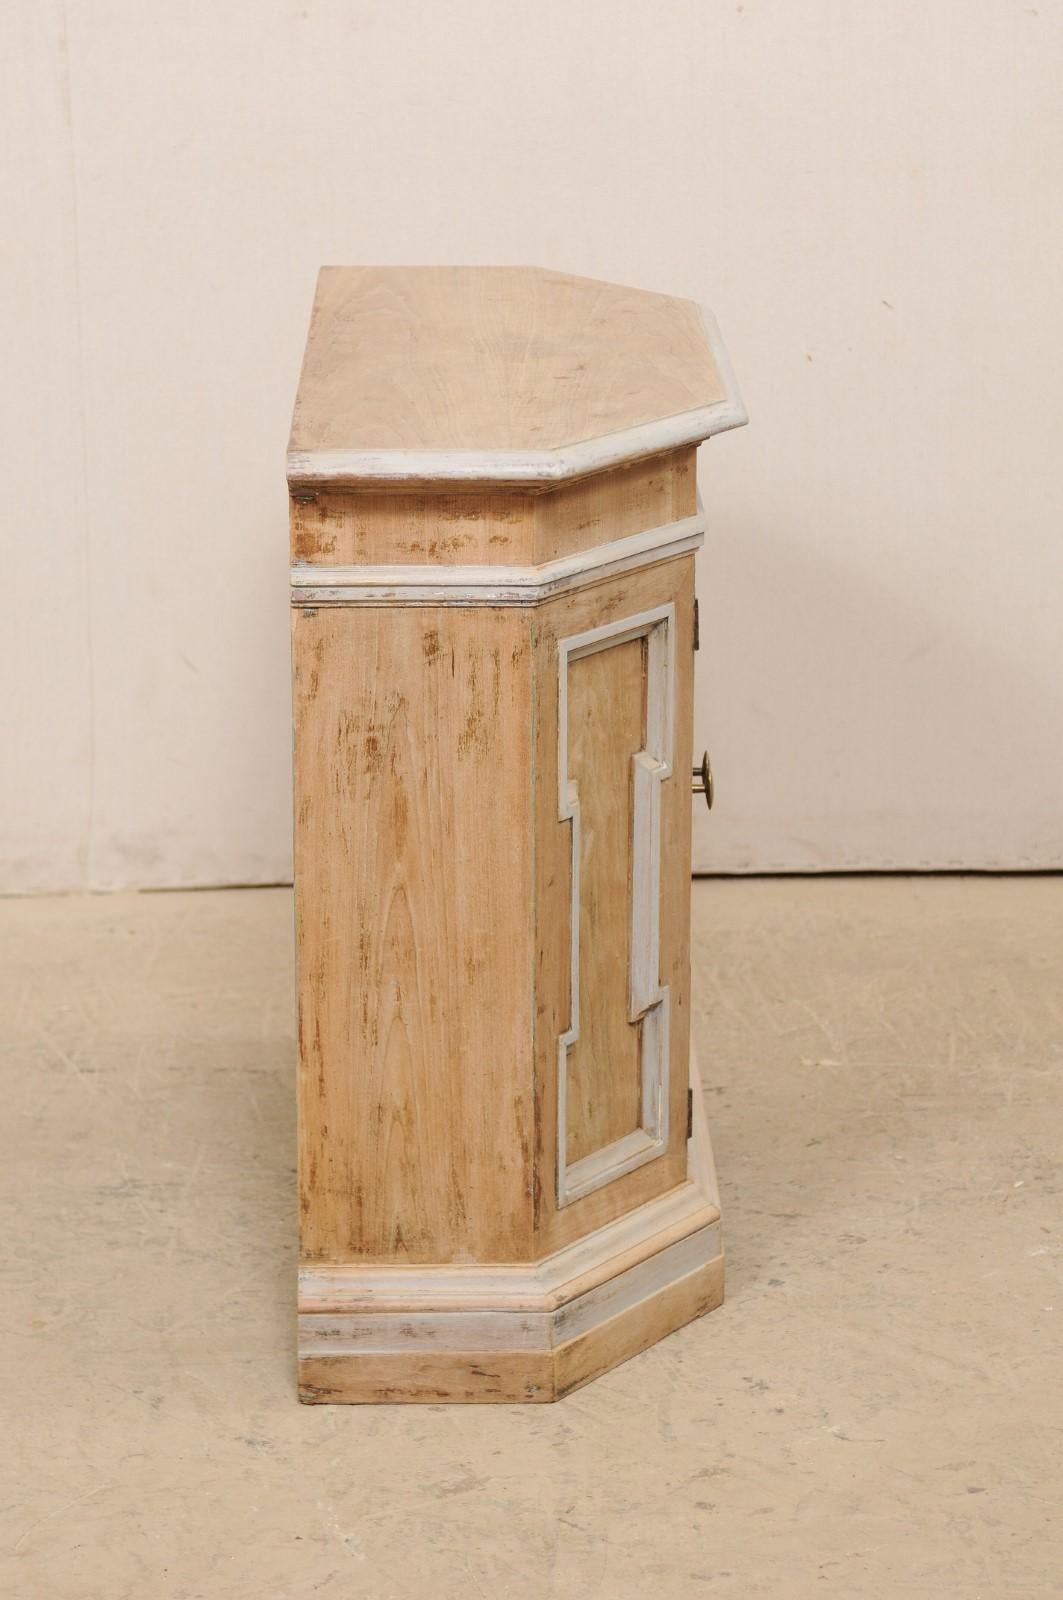 Italian Bleached Wood Console Cabinet with Blue/Gray Trim, Cute Petite Size 4